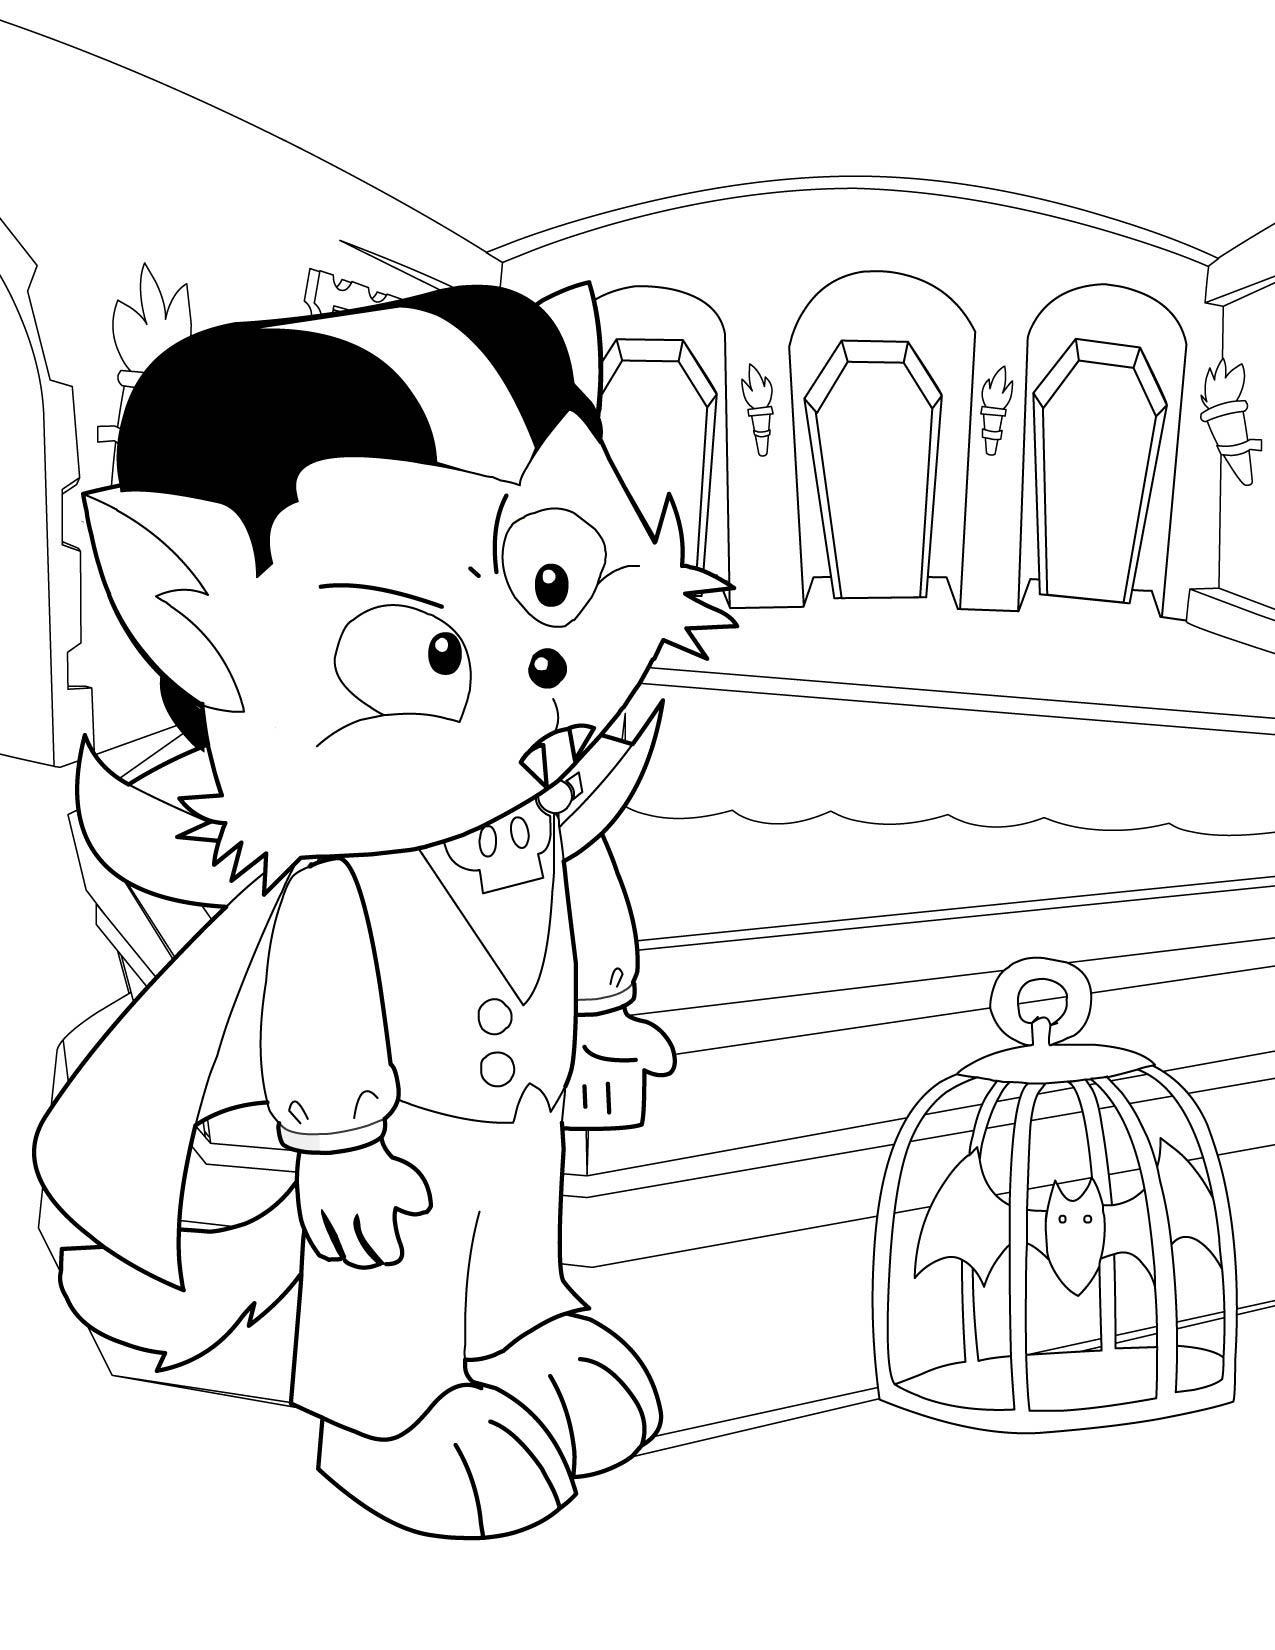 Vampire Coloring Page - Ultra Coloring Pages